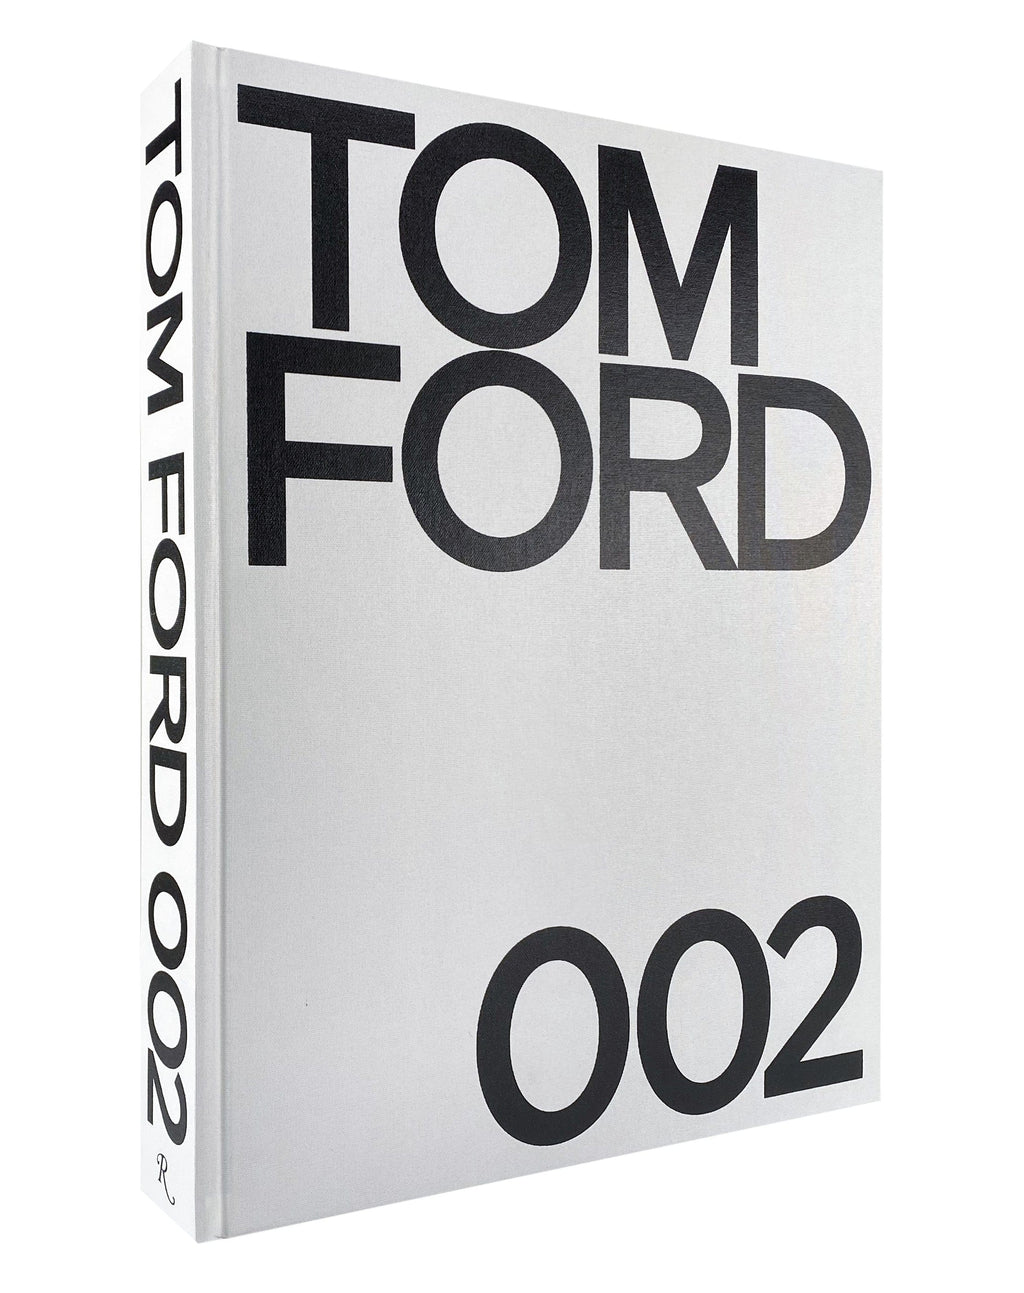 Tom Ford 002 by Tom Ford (7715480436985)